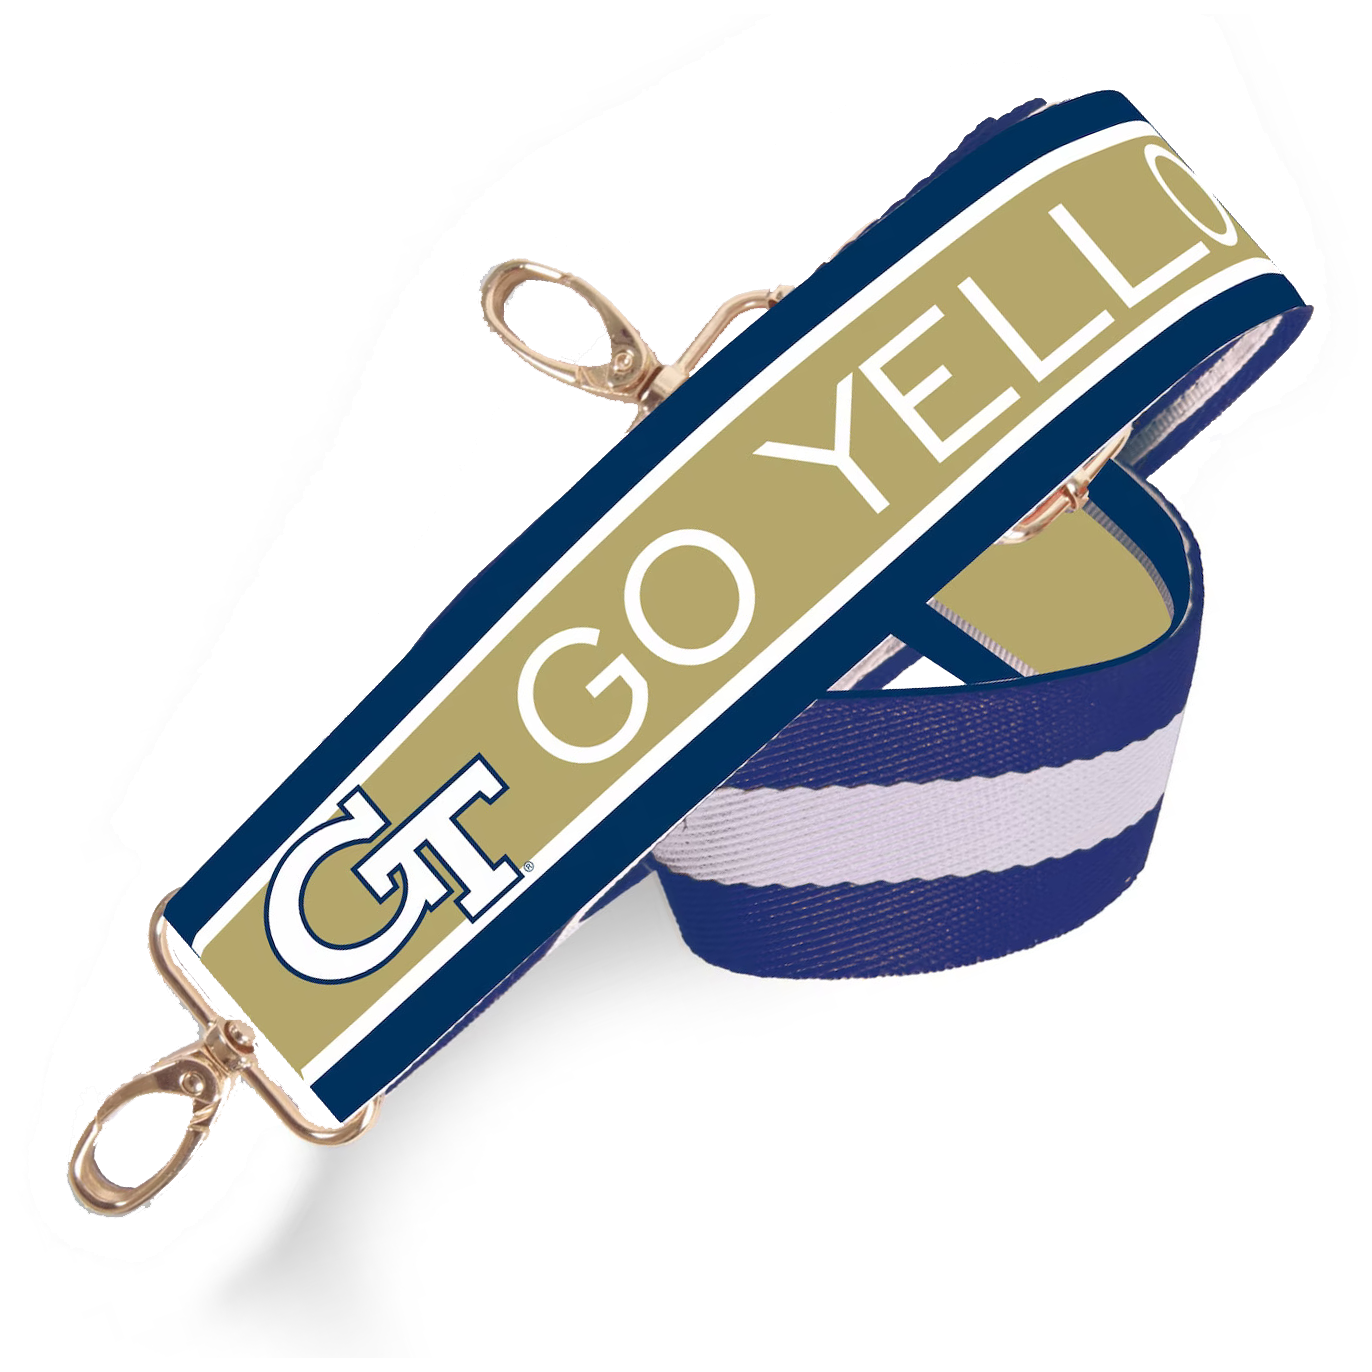 GEORGIA TECH 1.5" - Officially Licensed - Stripe